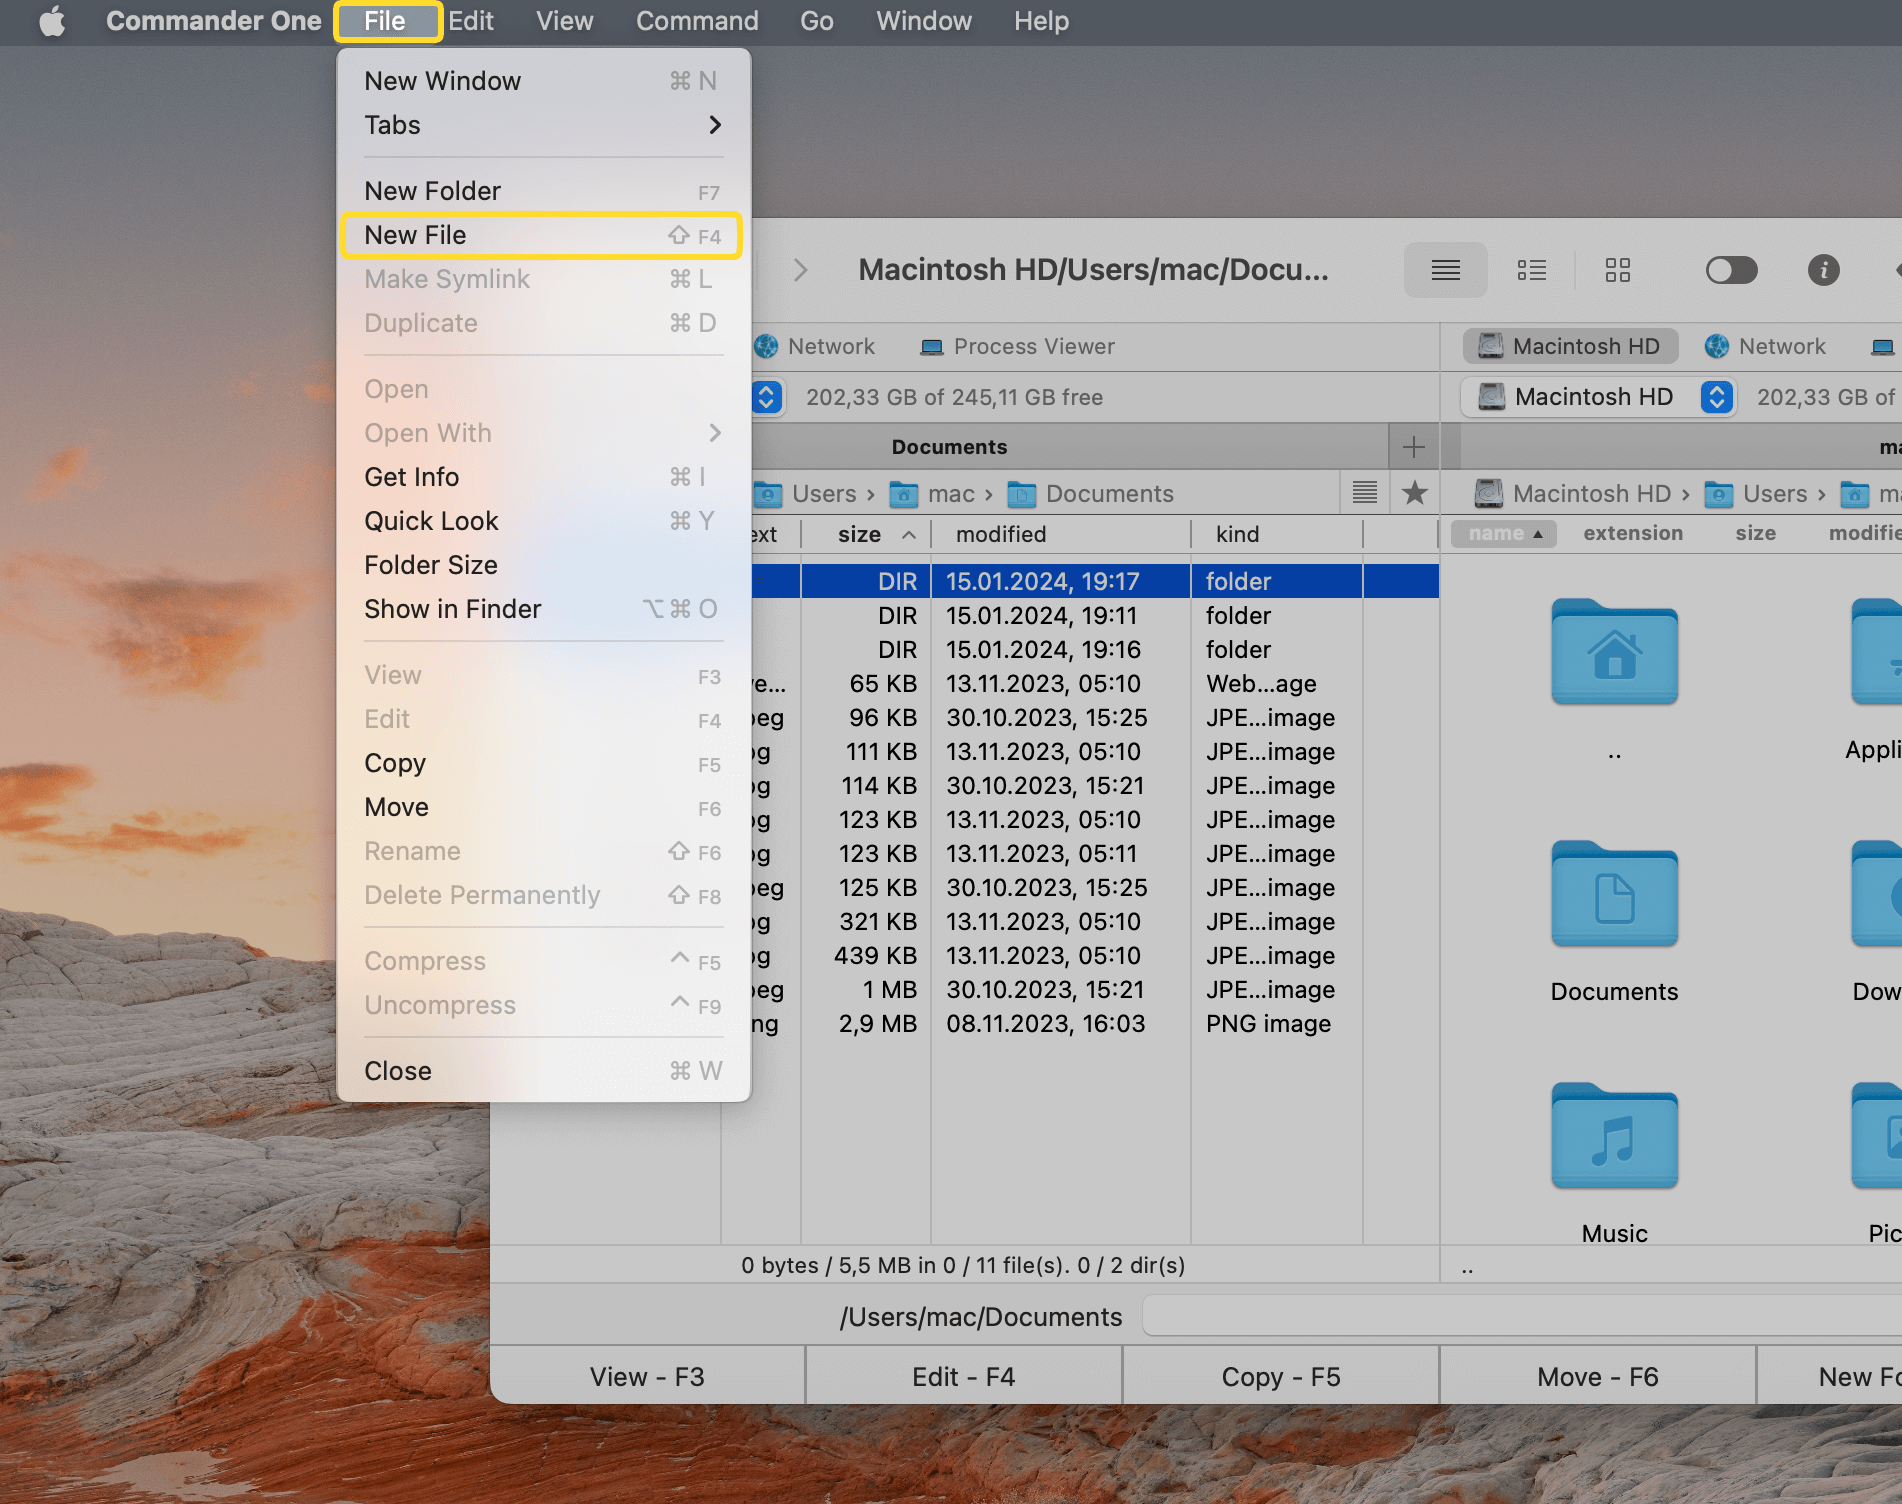 How to create new file on Mac with Commander One